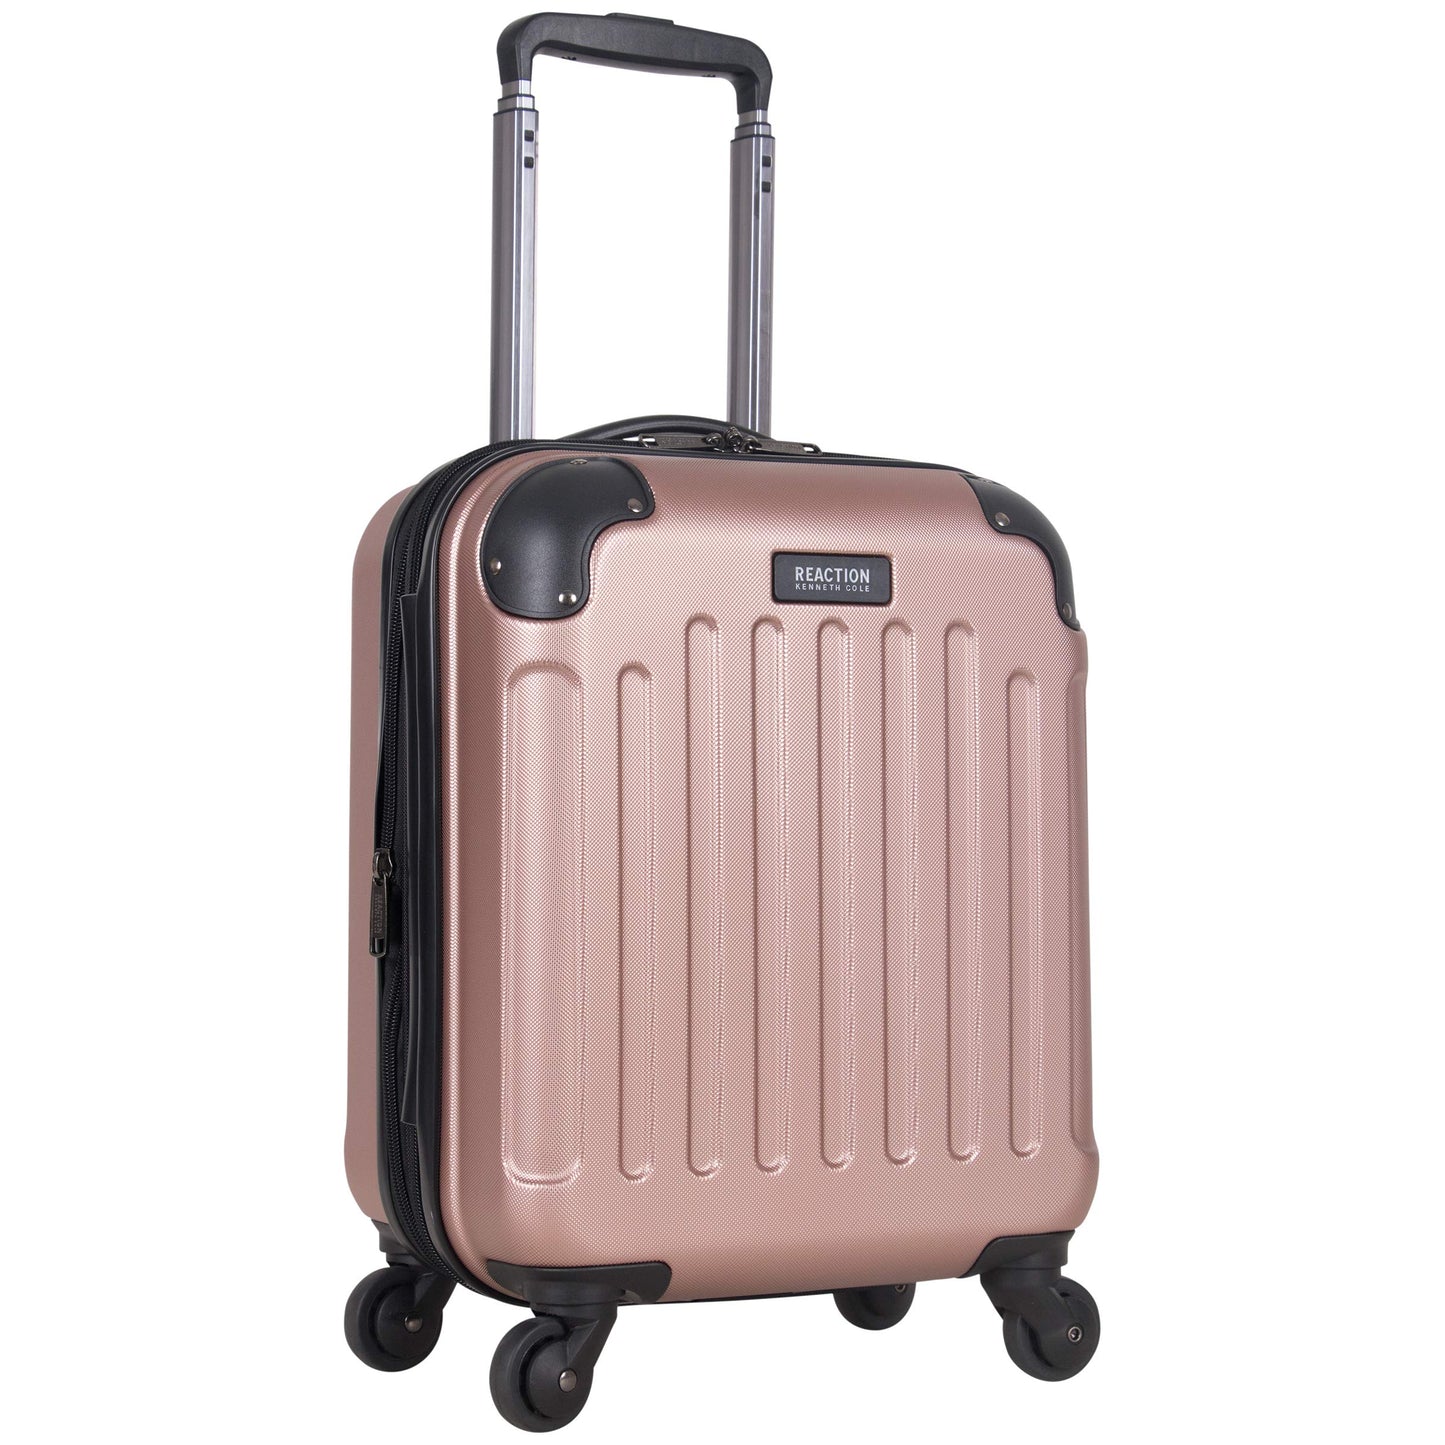 Kenneth Cole Reaction Renegade 16" Hardside Expandable 4-Wheel Spinner Mini Carry-on Luggage, One Size, Renegade - 20" Expandable 8-wheeled Upright/Carry-on